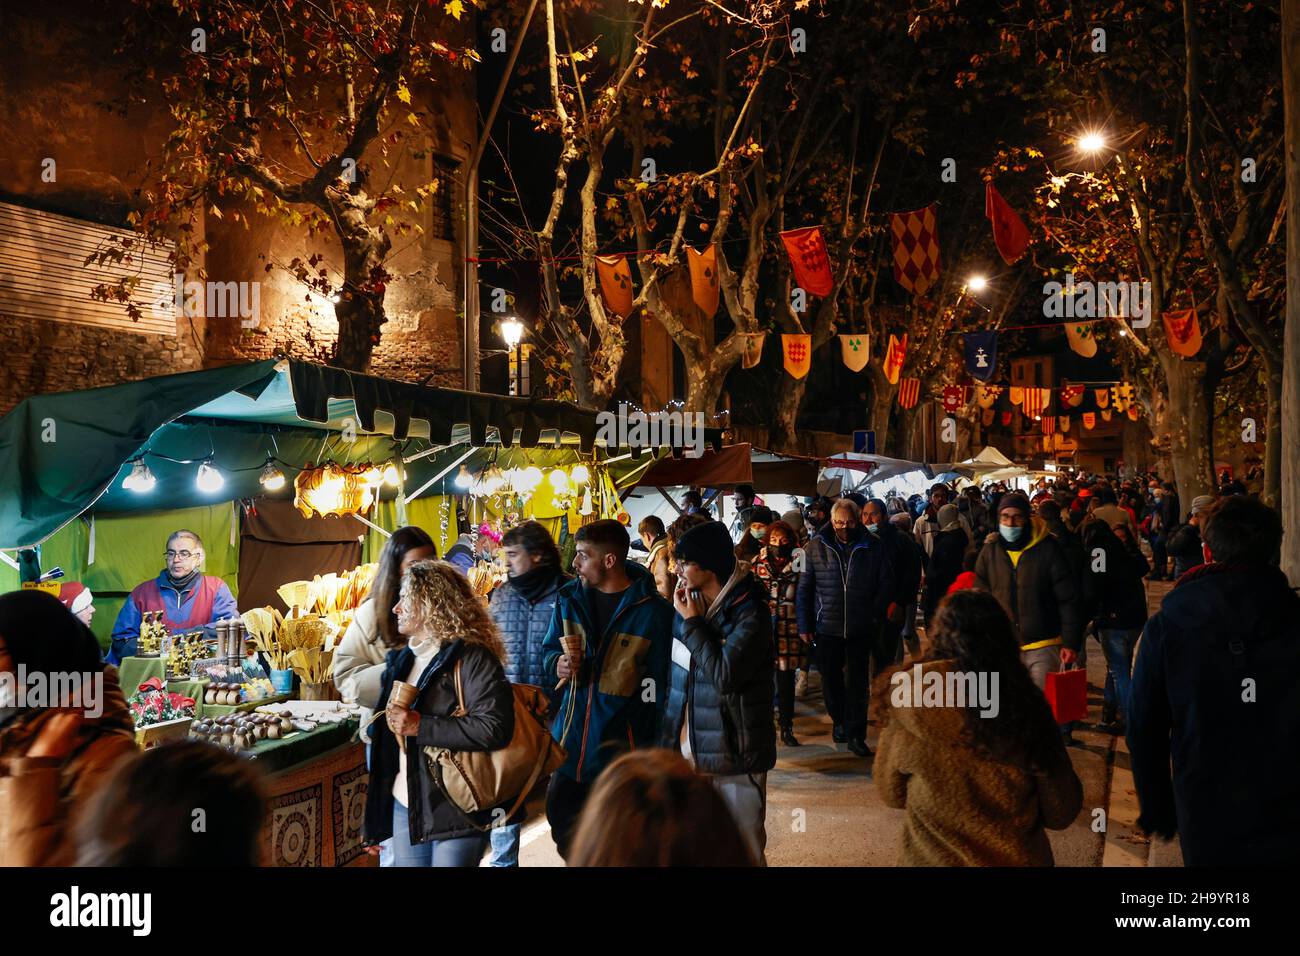 Market stalls and banners in the Medieval Christmas market in the town of Vic in Catalonia, Spain Stock Photo